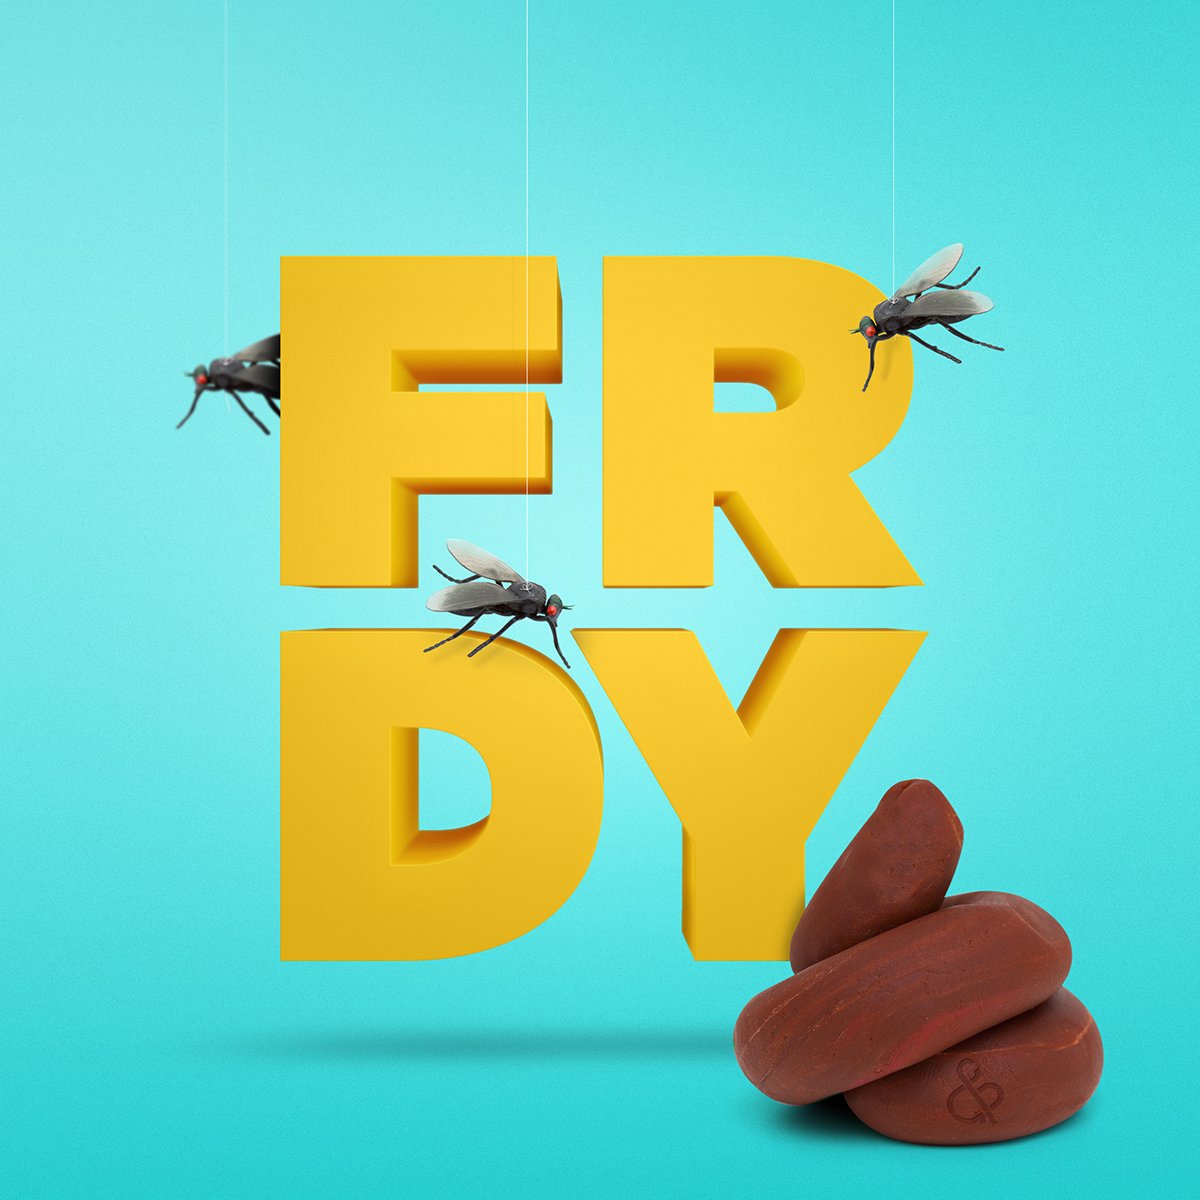 Thought we'd go a bit tongue & cheek this week for all you #AprilFools !
#FridayFeeling #abccreate #Typography #FRDY